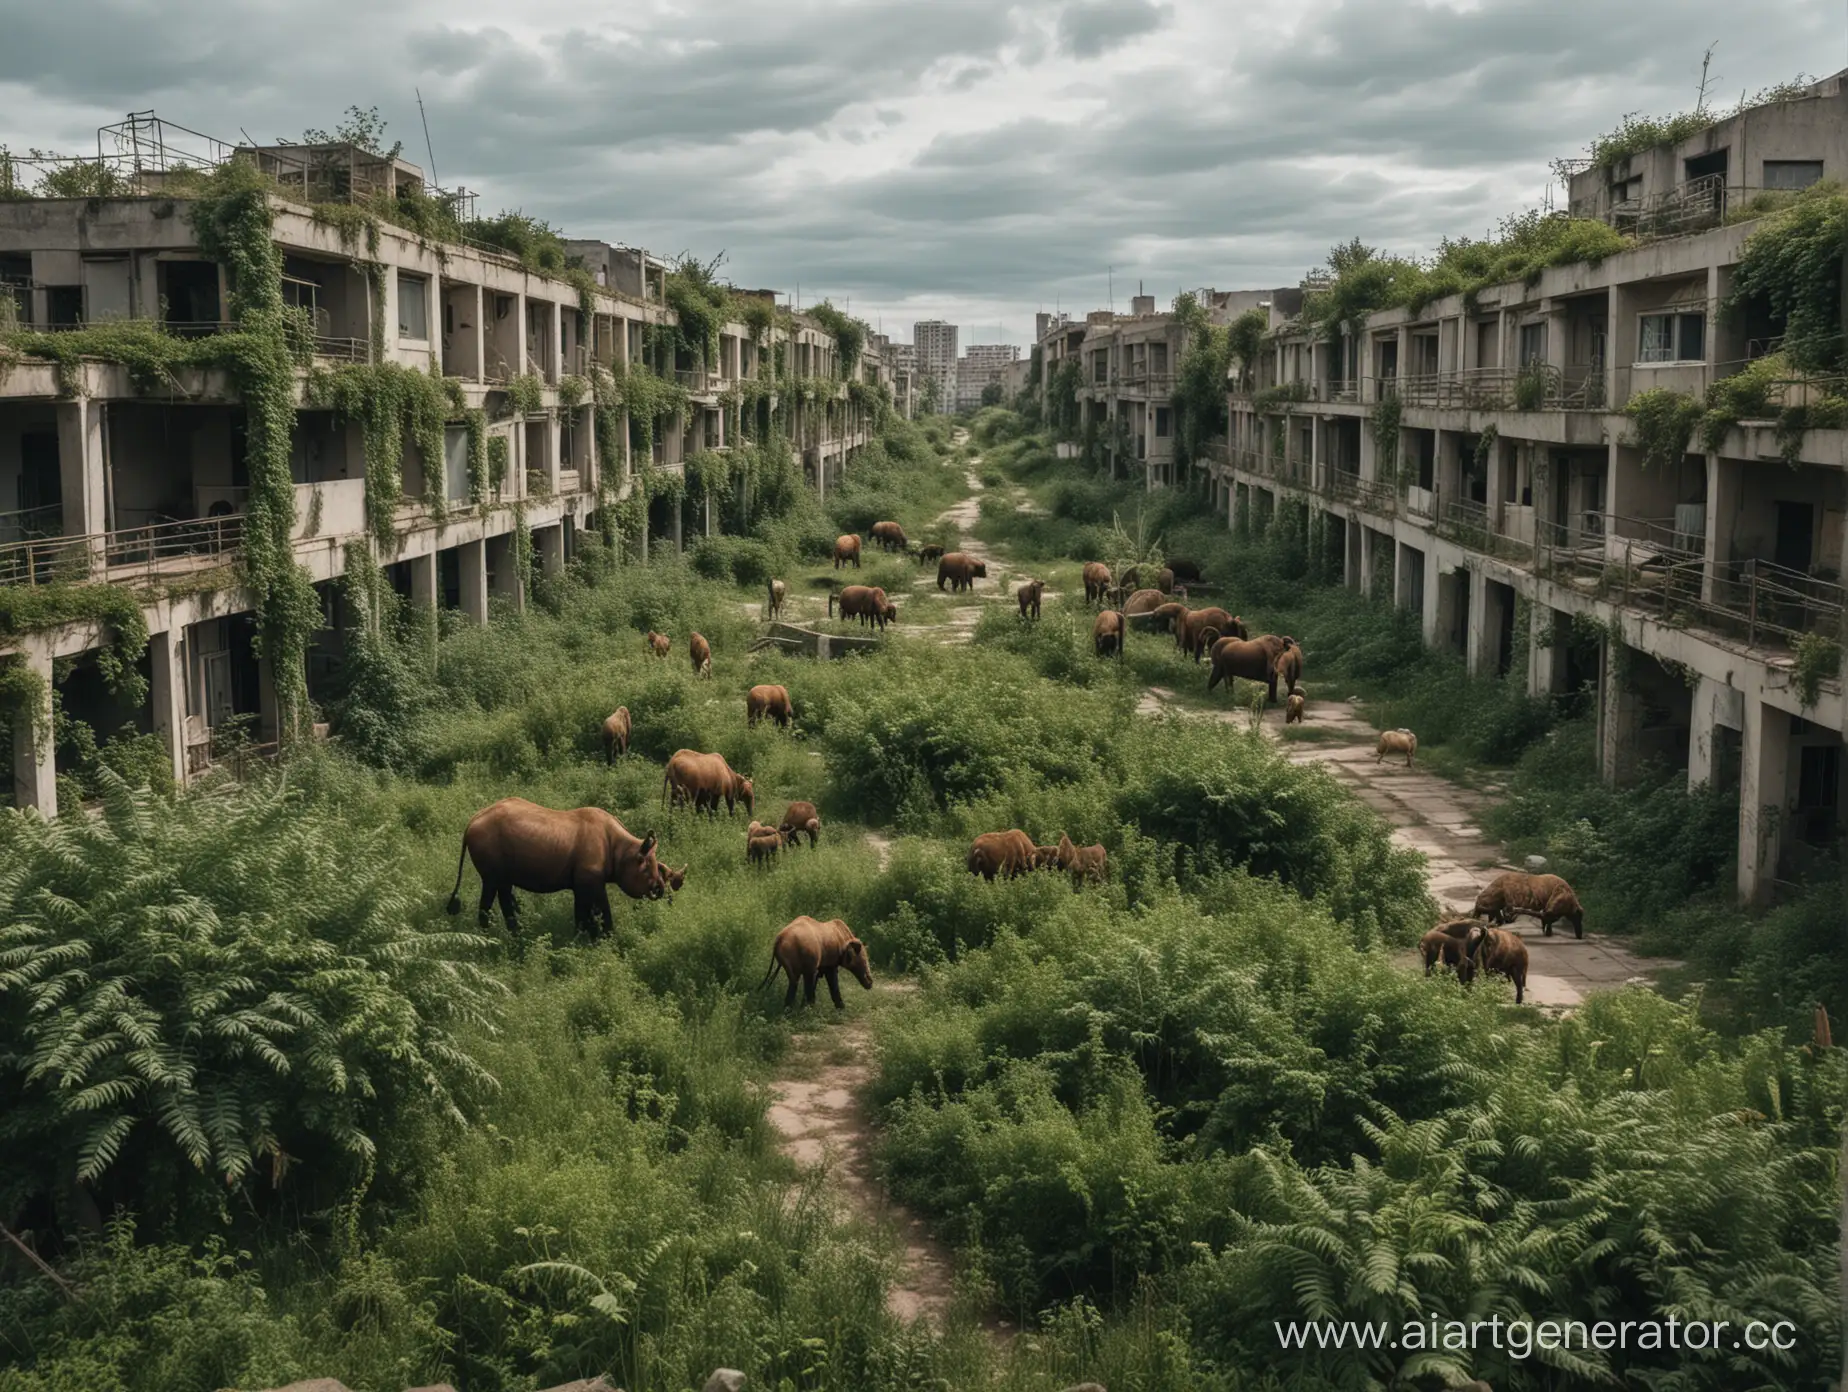 An abandoned city covered with plants where wild animals walk